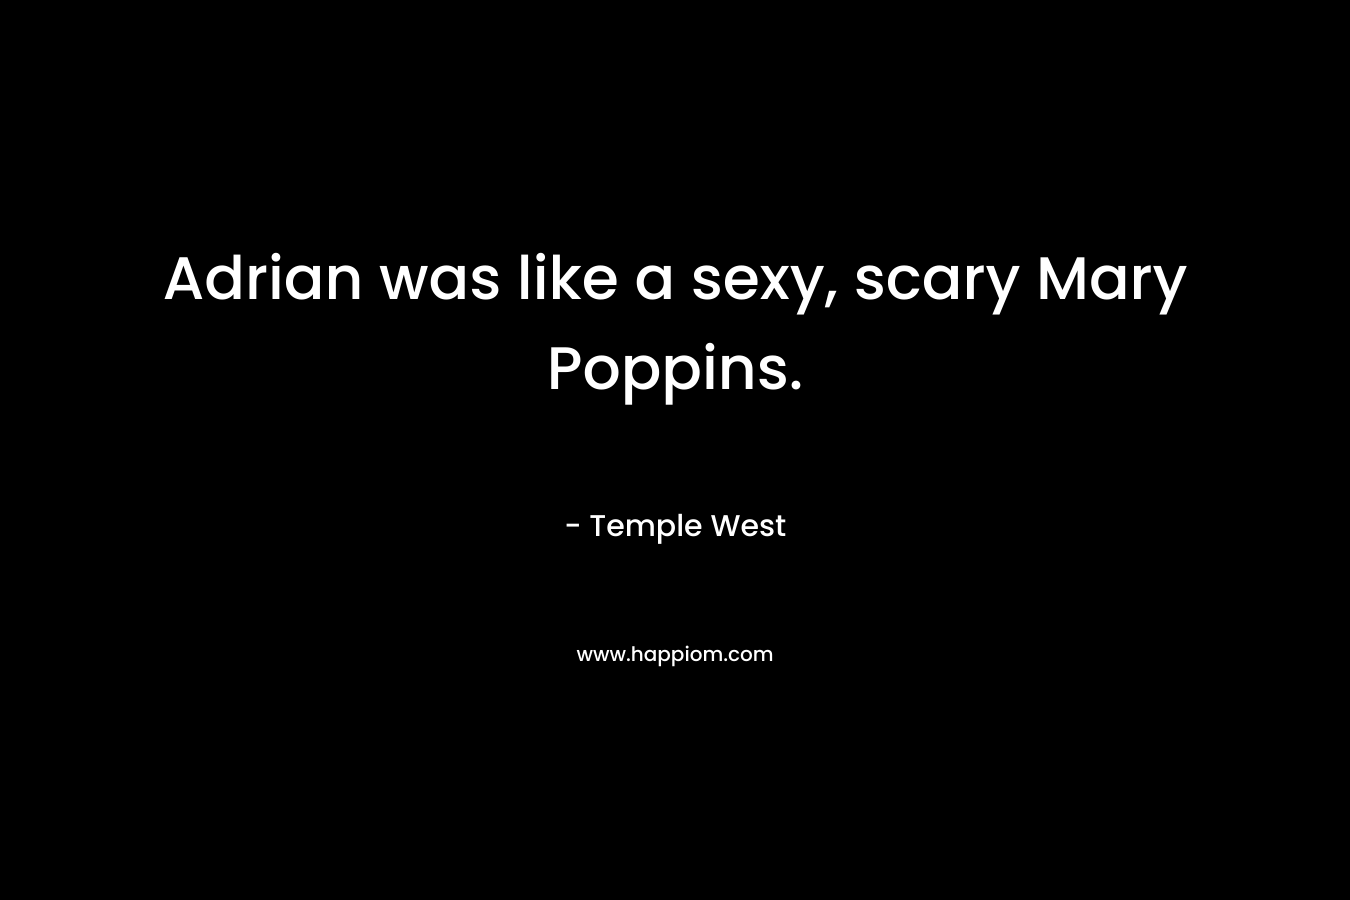 Adrian was like a sexy, scary Mary Poppins. – Temple West